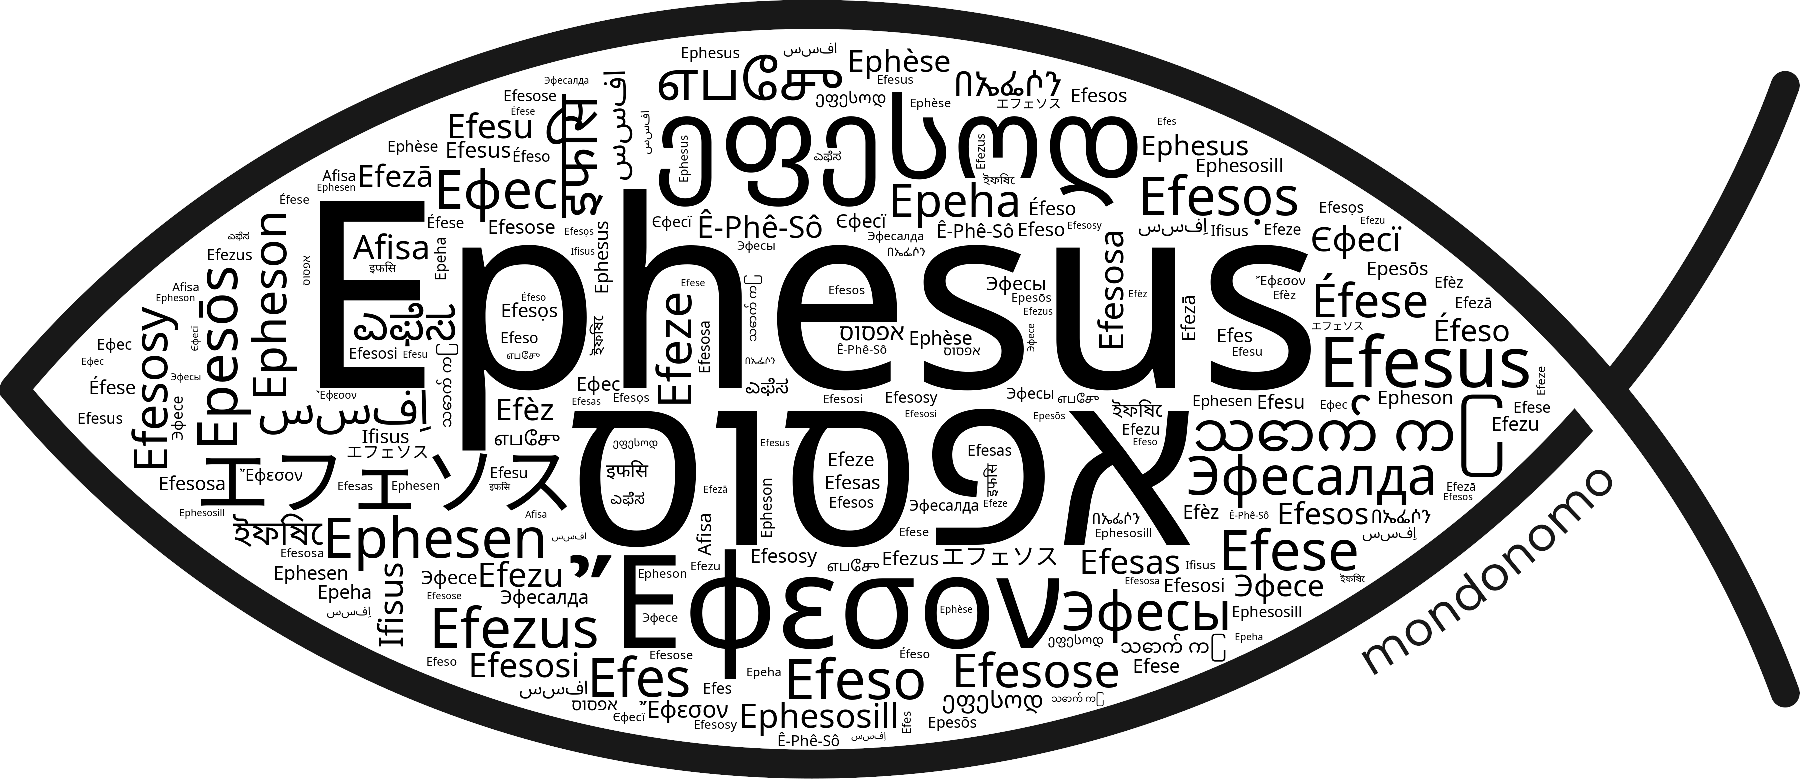 Name Ephesus in the world's Bibles